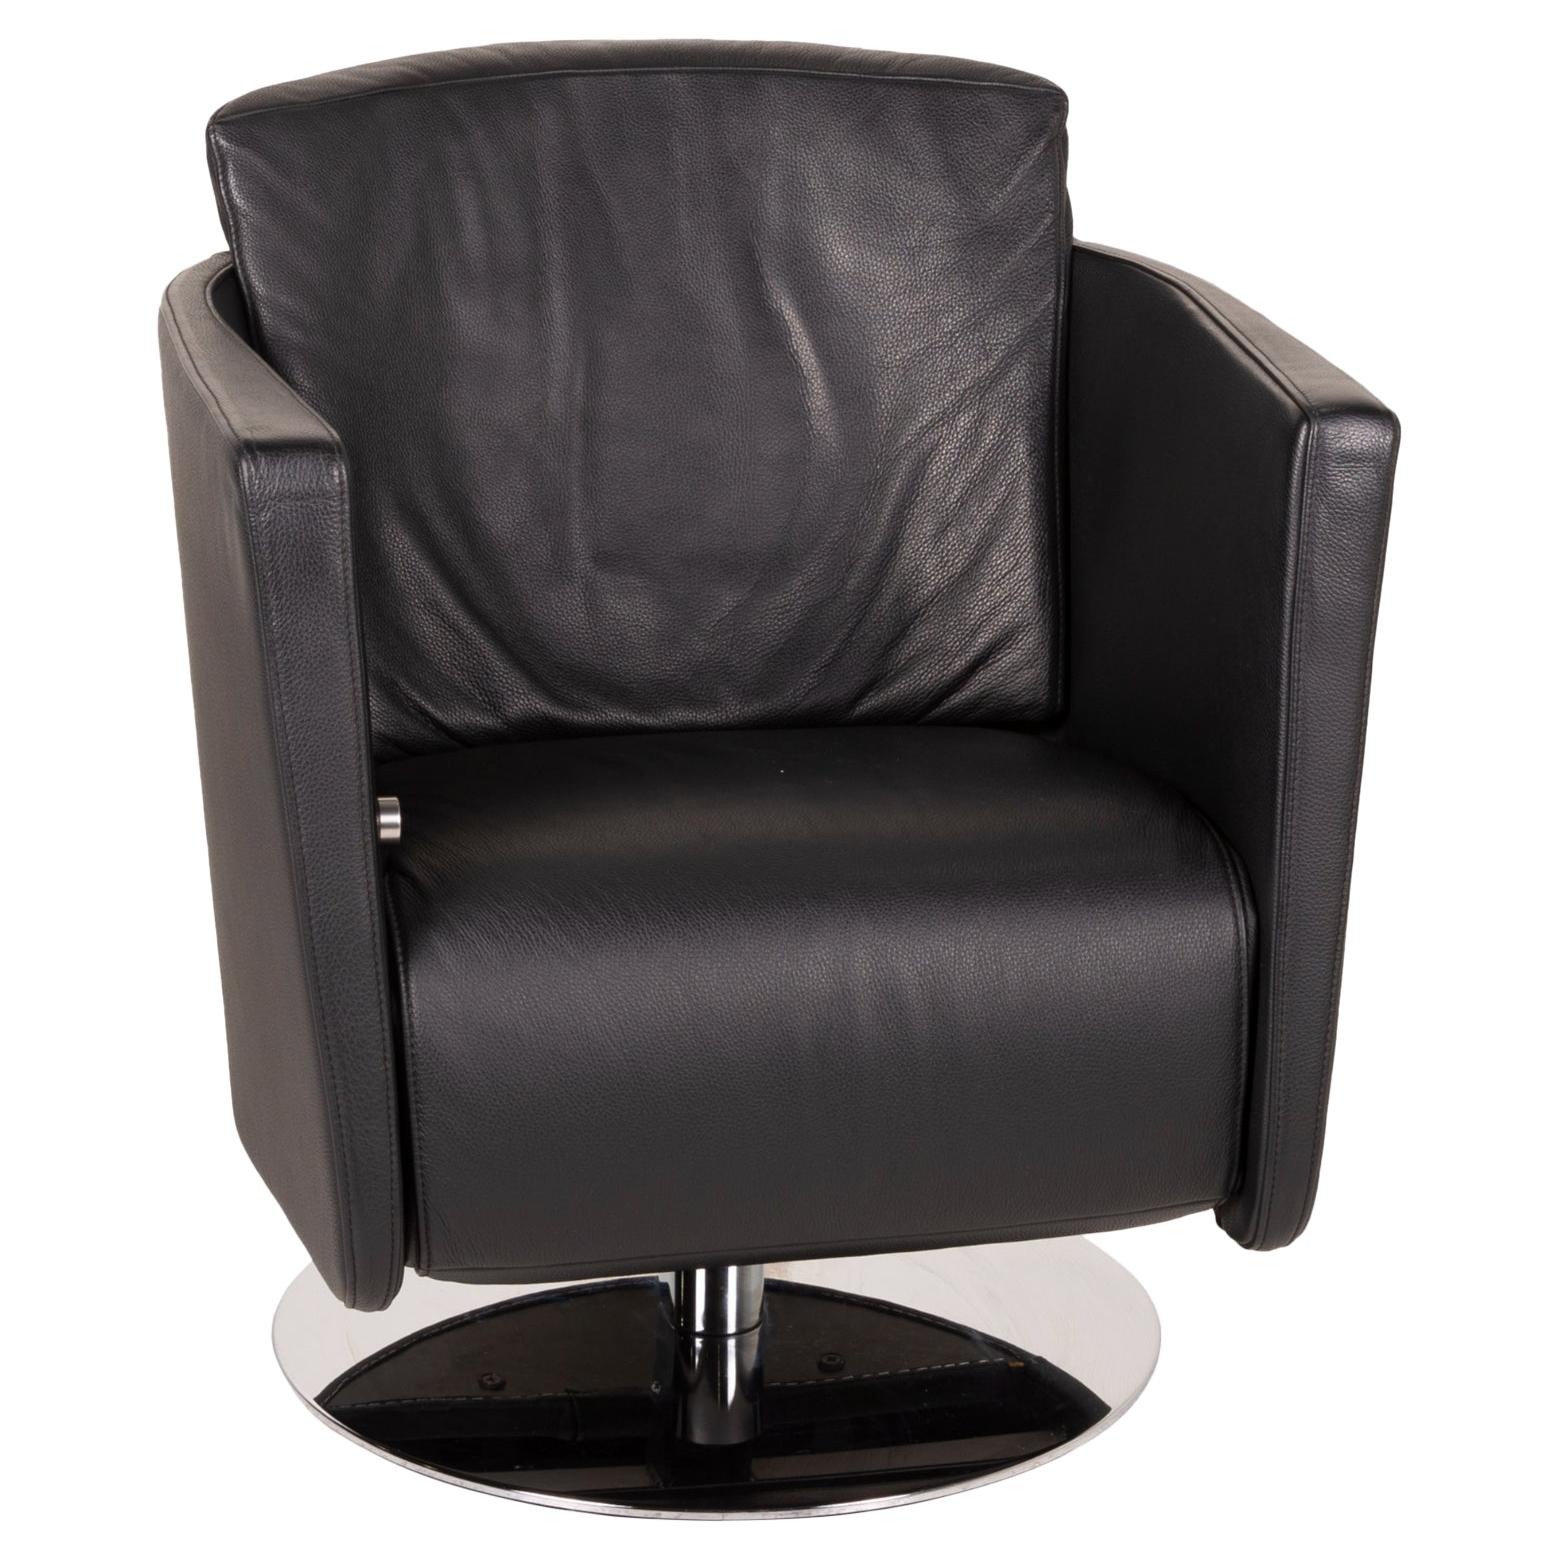 FSM Just Leather Armchair Black Relaxation Function For Sale